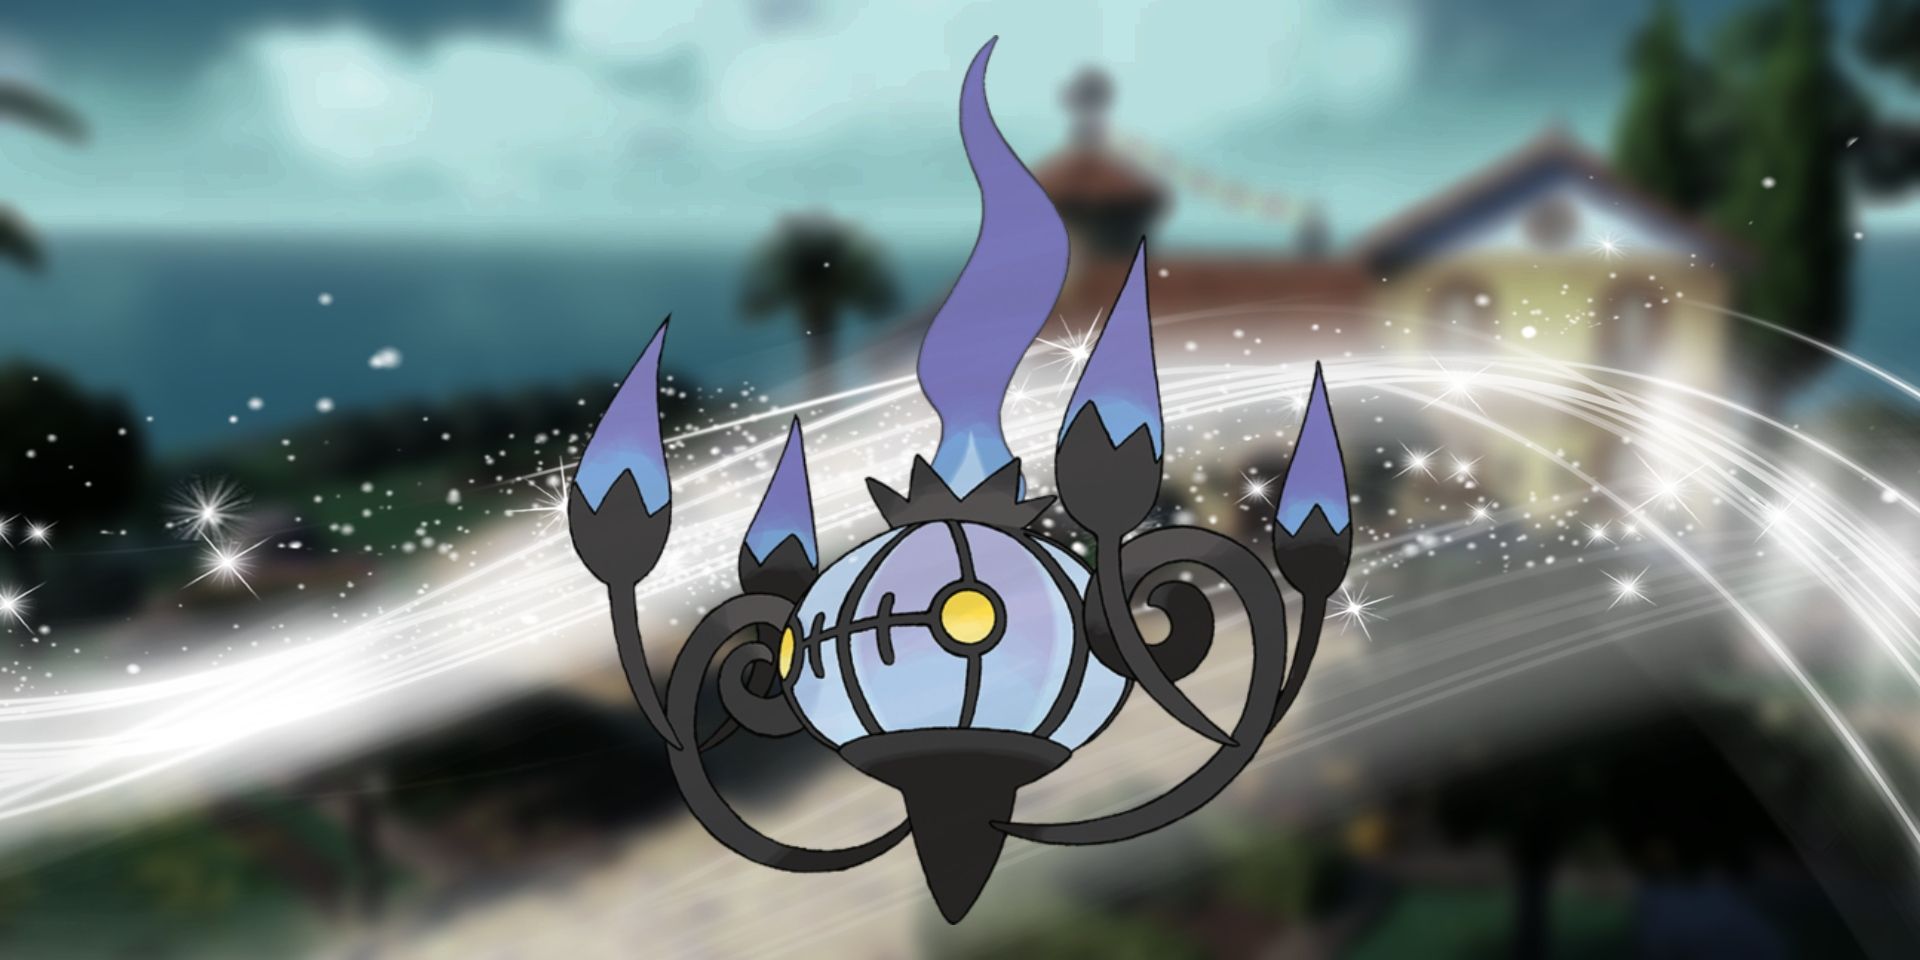 Pokemon's Chandelure in the middle. Behind it is a white flowing and sparkling effect.